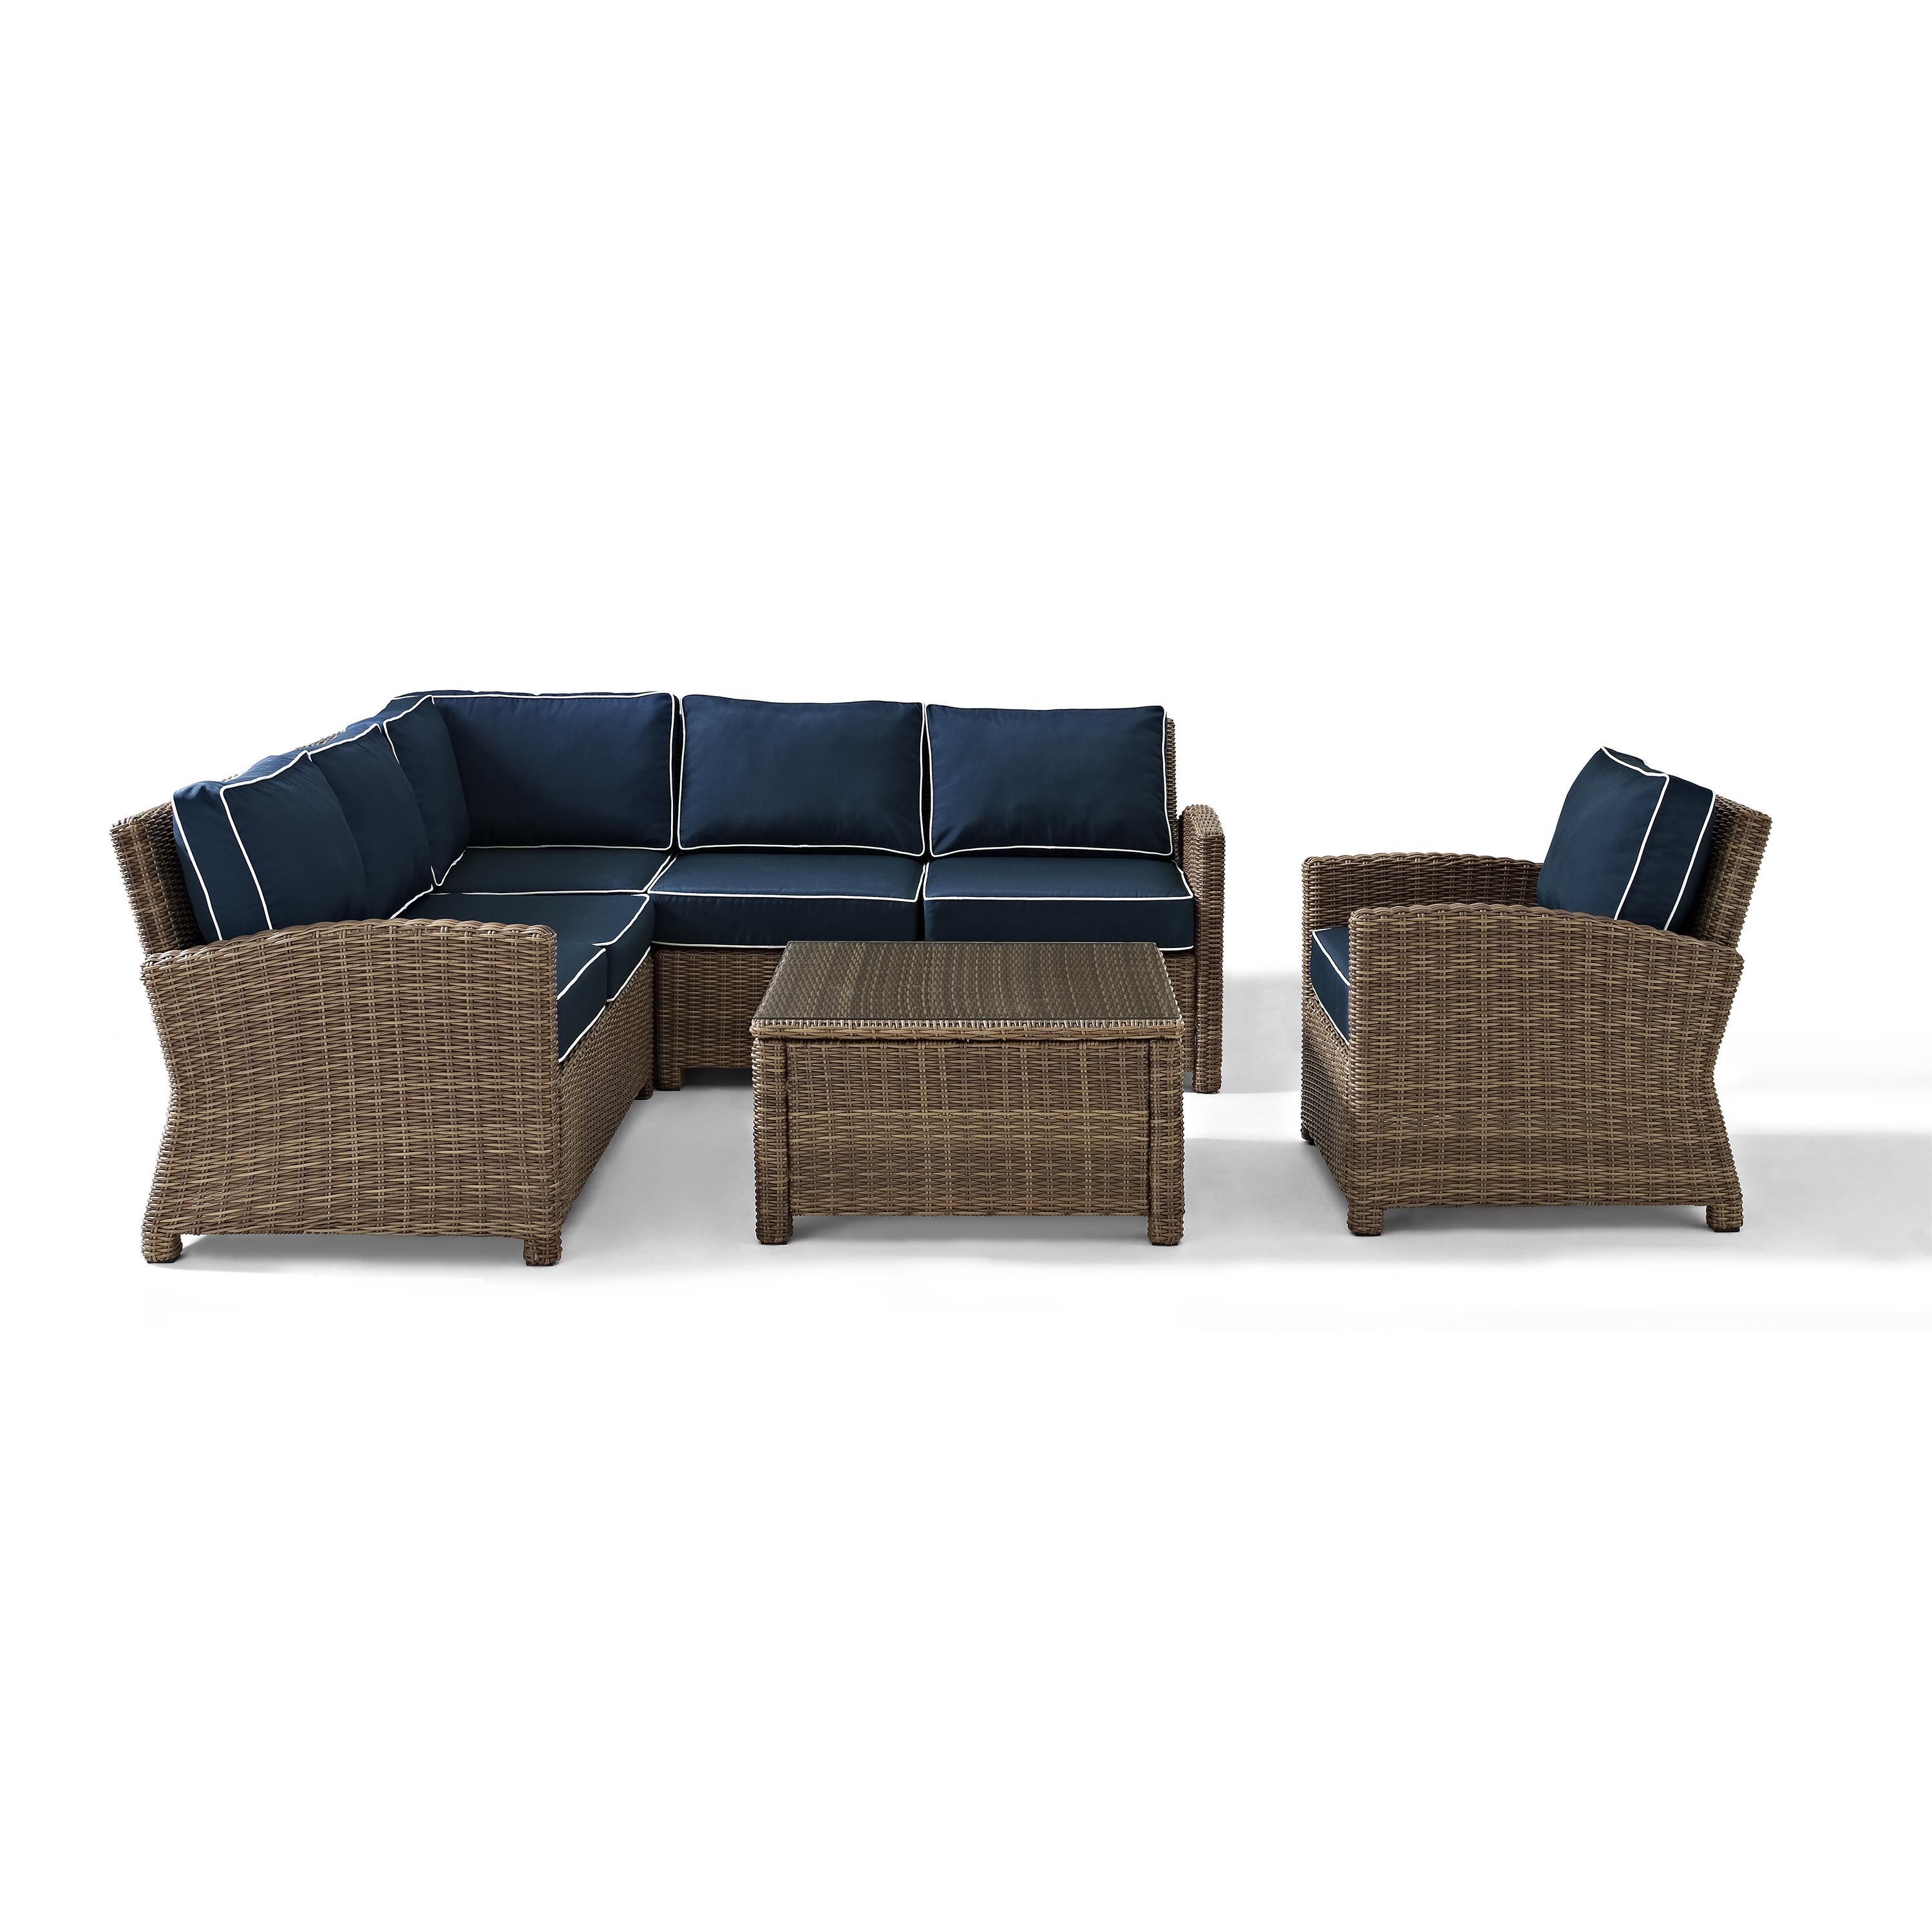 Crosley Furniture Bradenton 5 Pc Fabric Patio Sectional Set in Brown and Navy - image 5 of 10